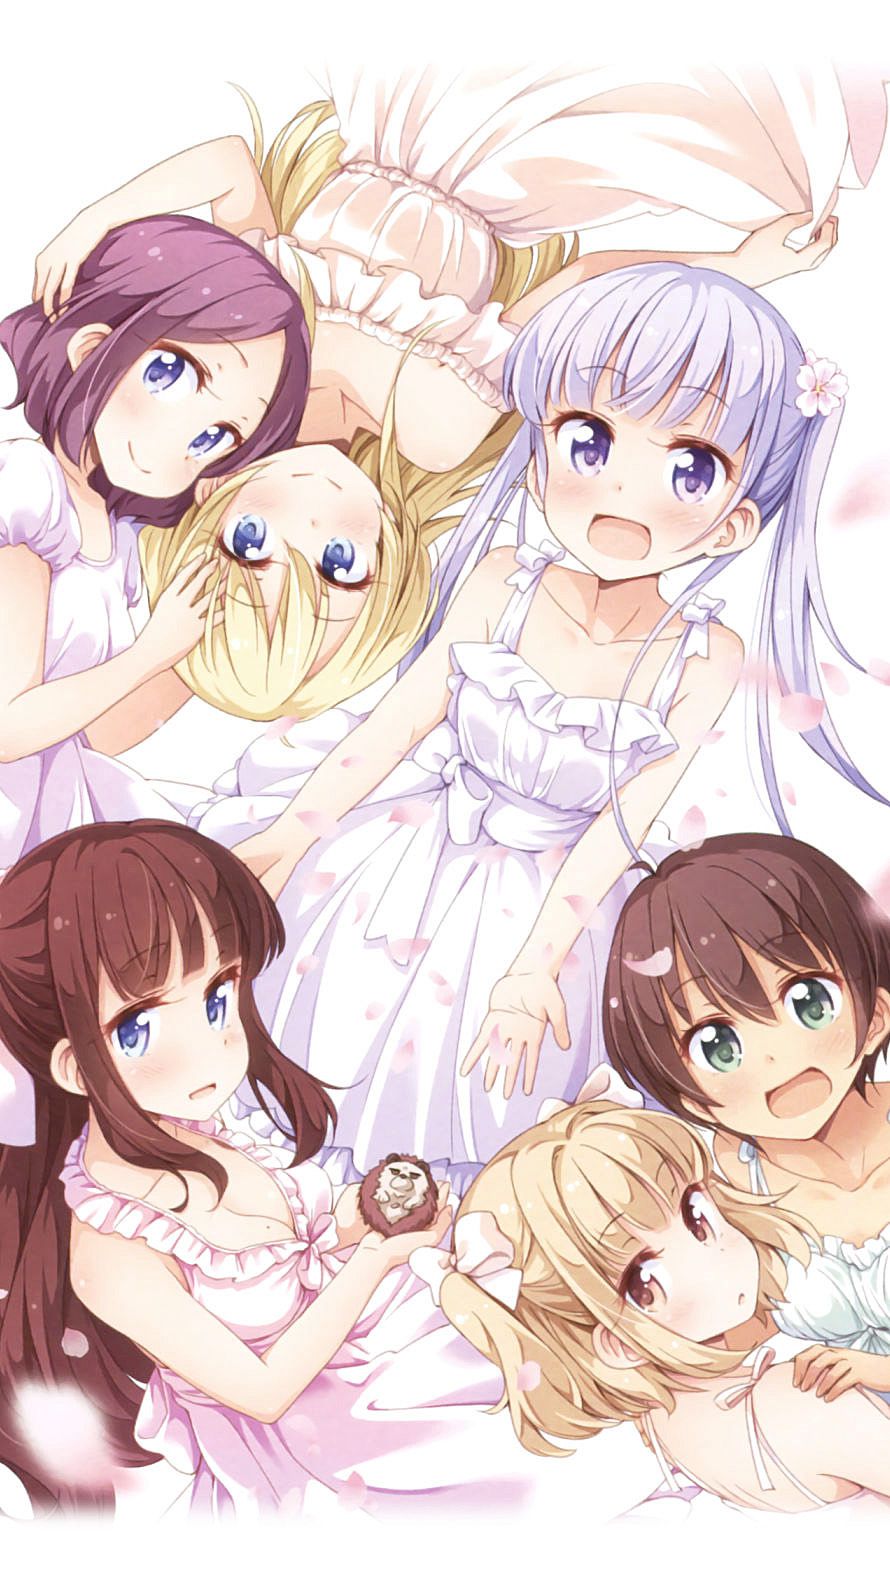 New Game ニューゲーム Iphone壁紙画像 Androidスマホ壁紙 43 アニメ壁紙ネット Pc Android Iphone壁紙 画像